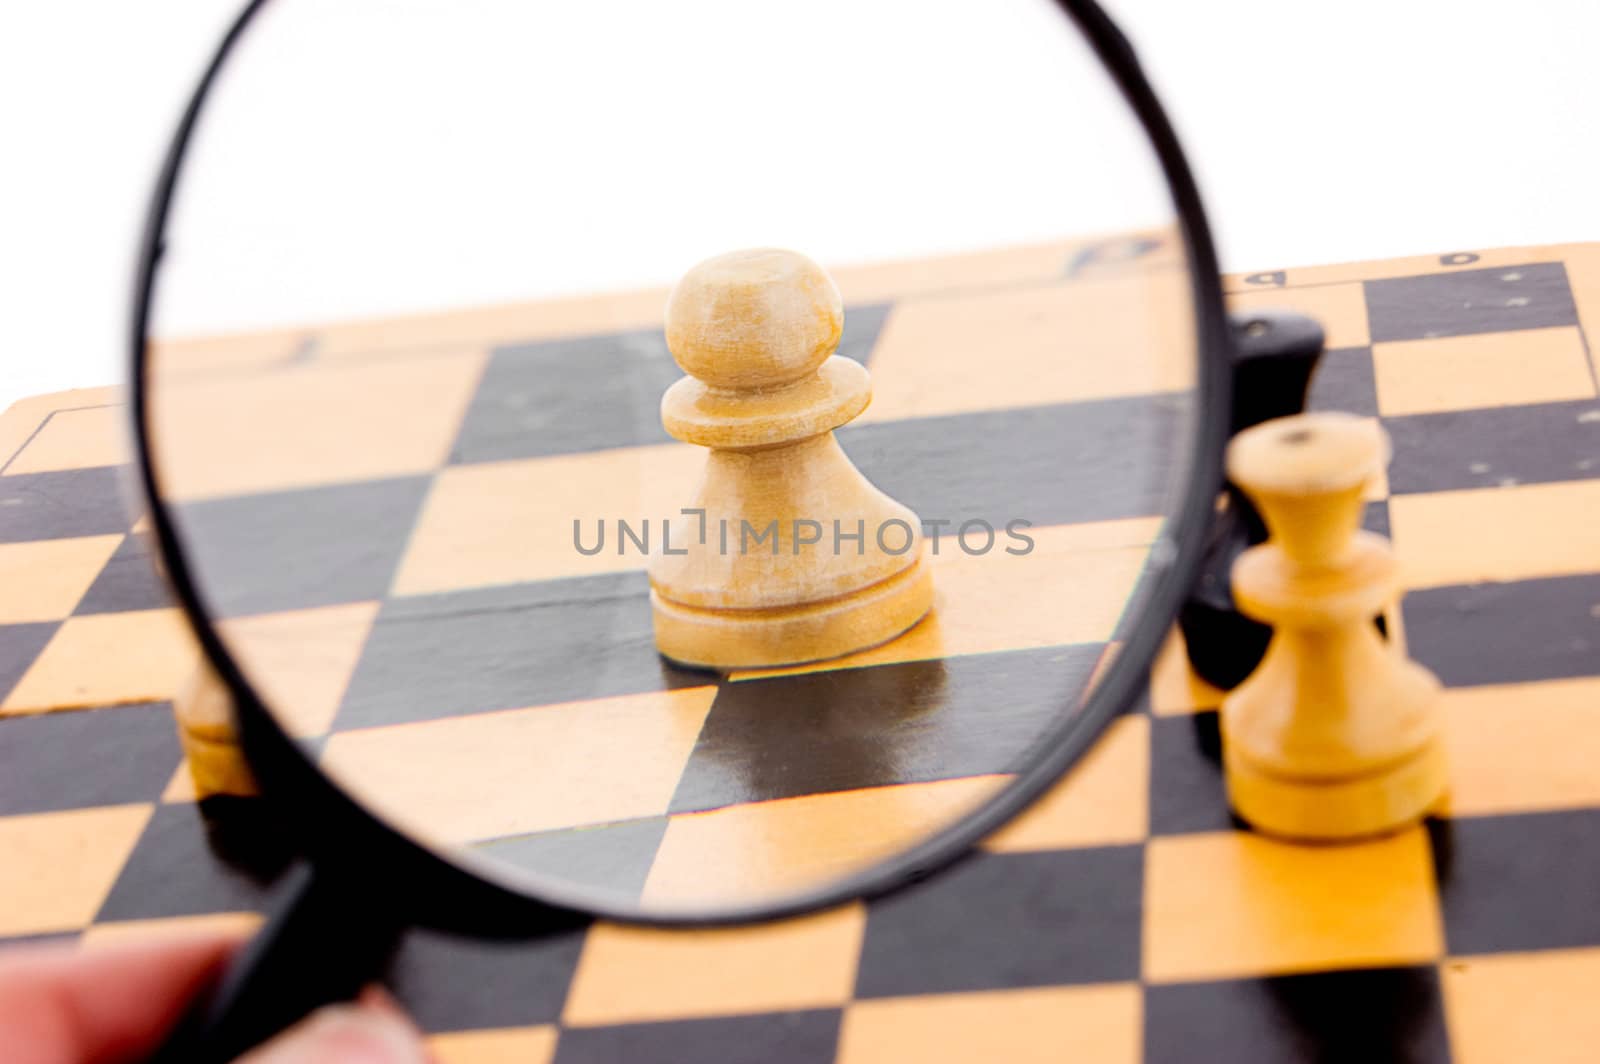 Pawn chess under magnifying glass